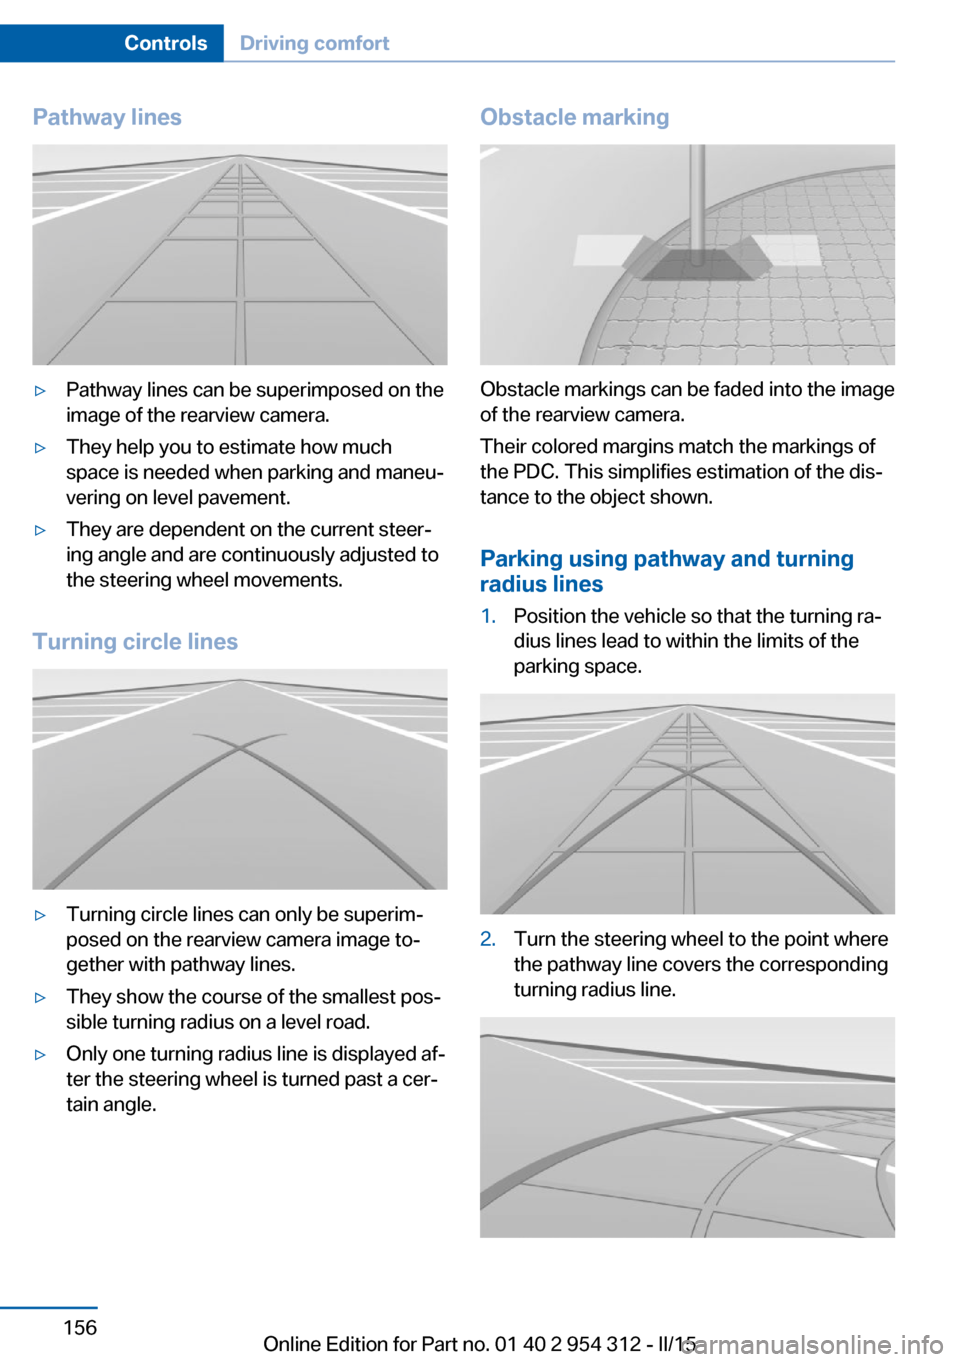 BMW 5 SERIES 2015 F10 Owners Manual Pathway lines▷Pathway lines can be superimposed on the
image of the rearview camera.▷They help you to estimate how much
space is needed when parking and maneu‐
vering on level pavement.▷They a